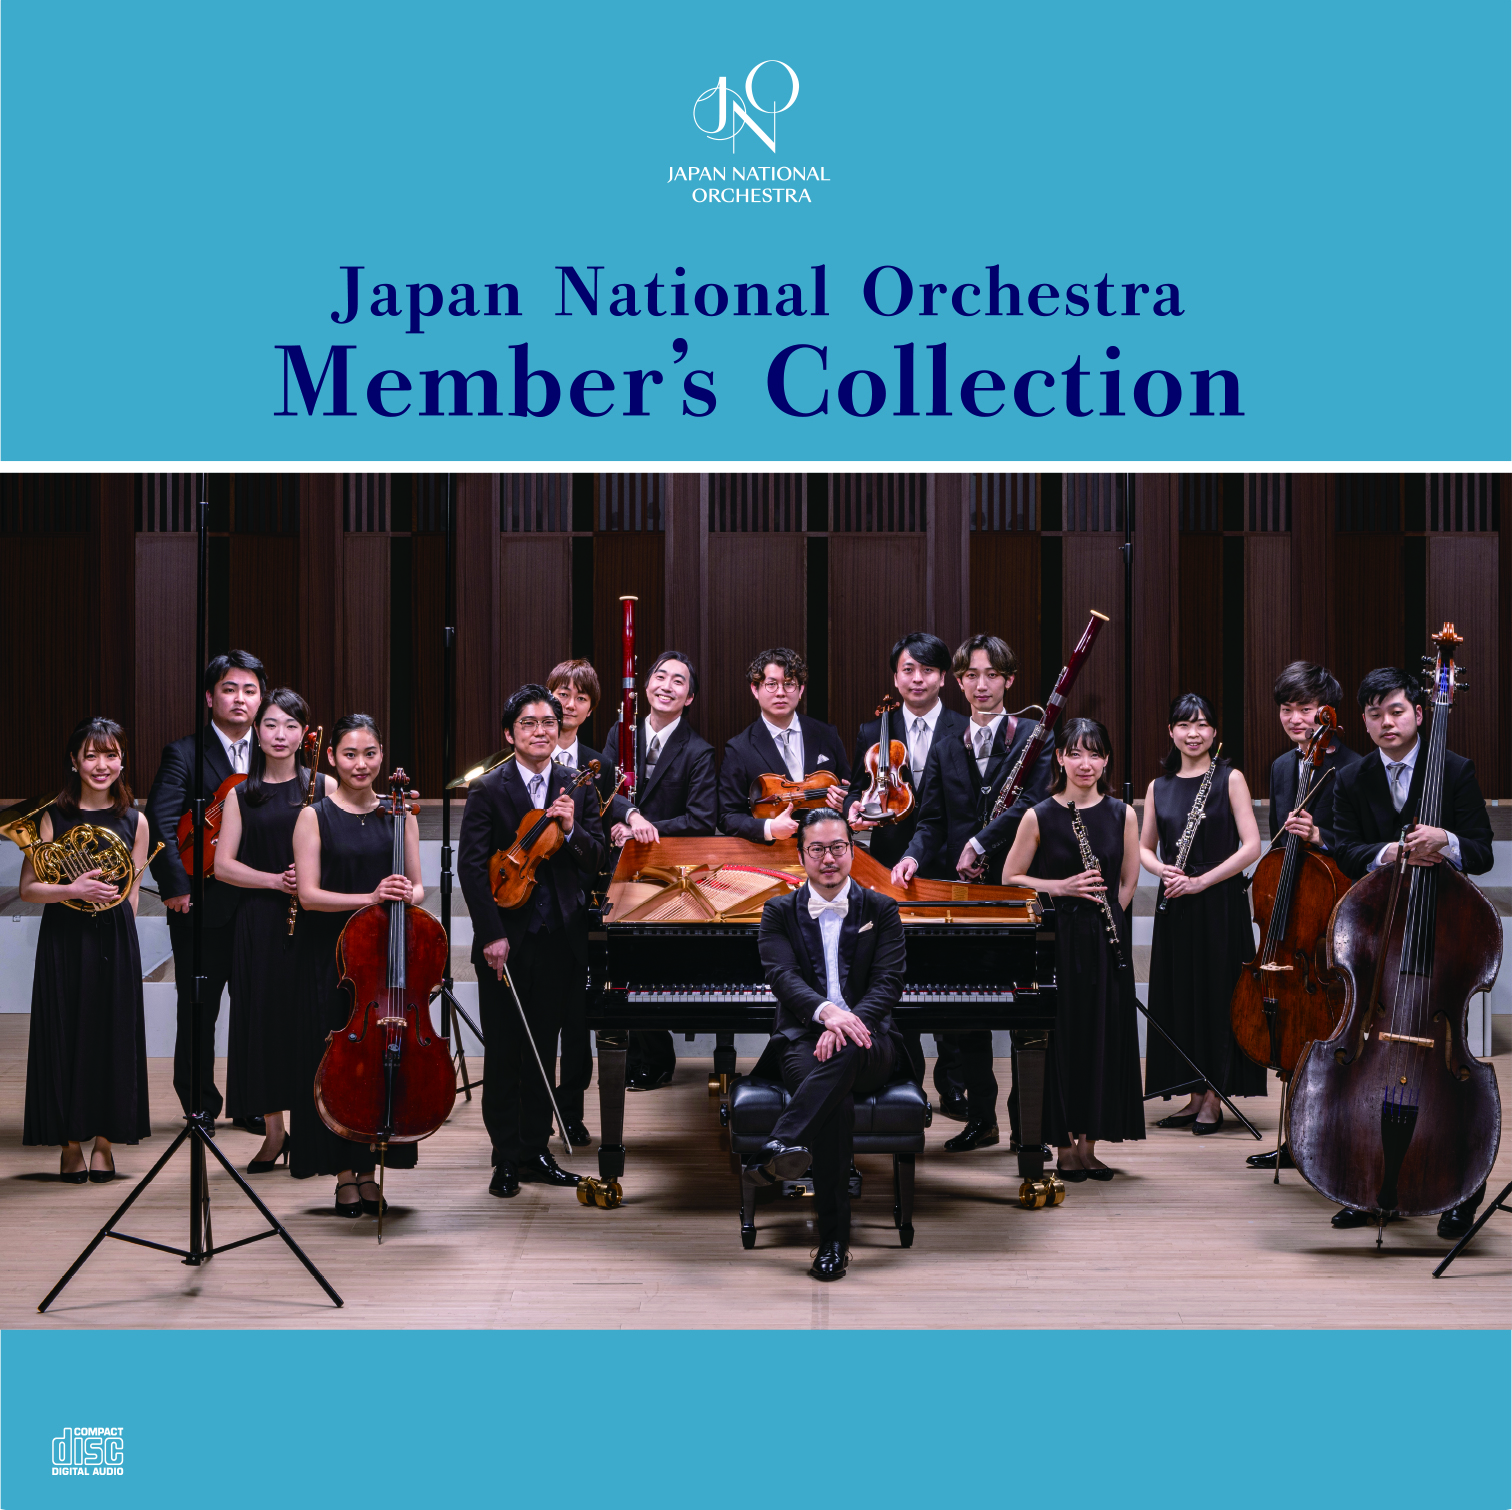 【concert exclusive】Japan National Orchestra Member’s Collection